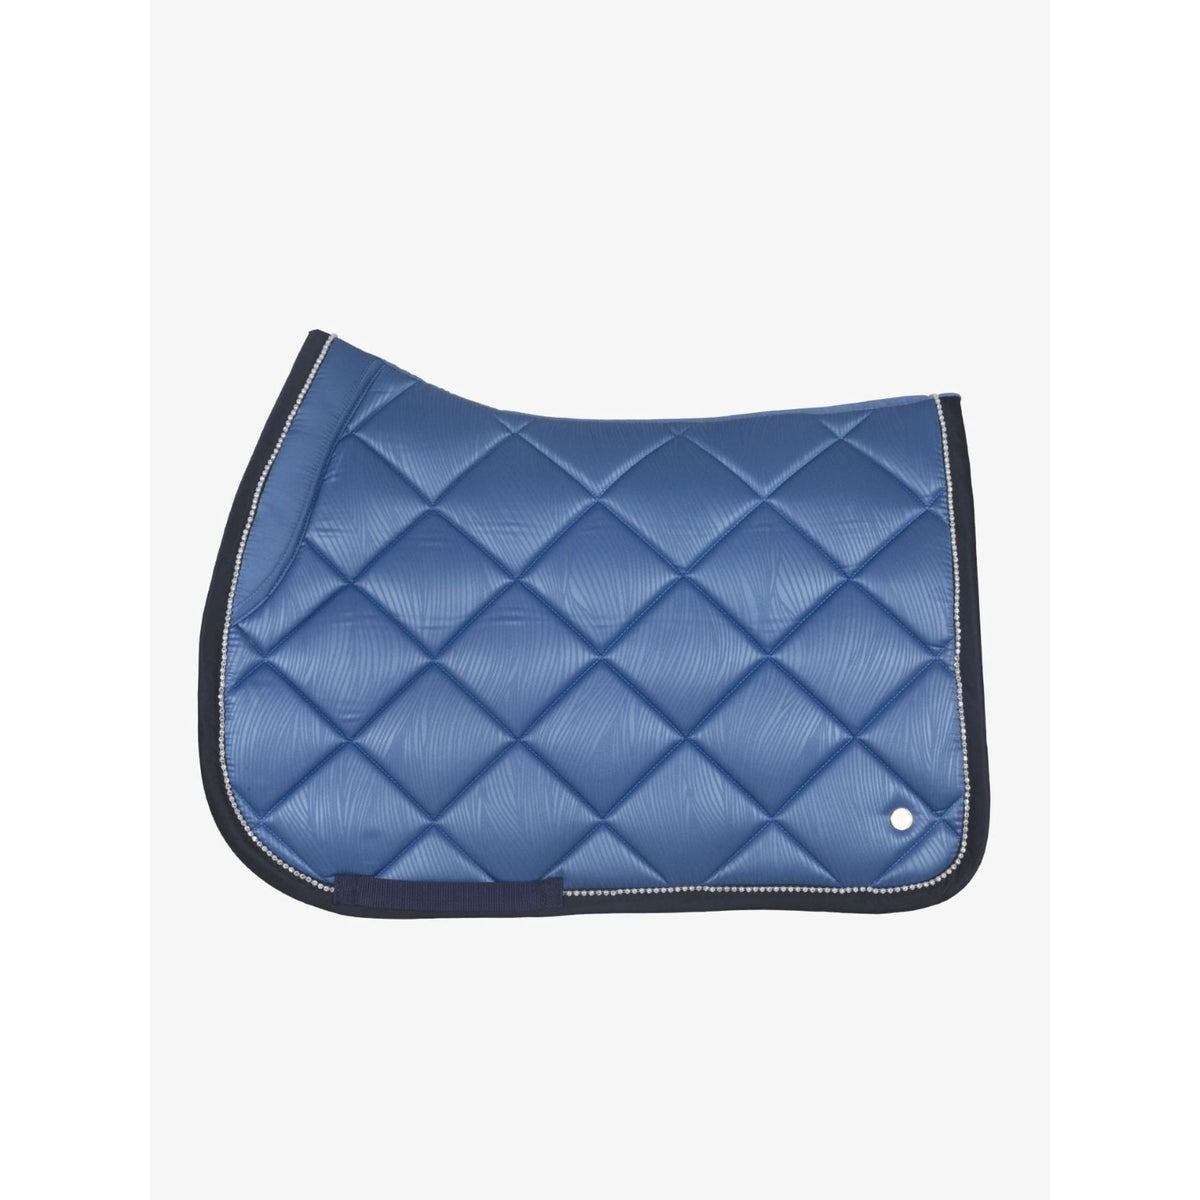 Blue saddle pad with subtle wave pattern and diamante border.